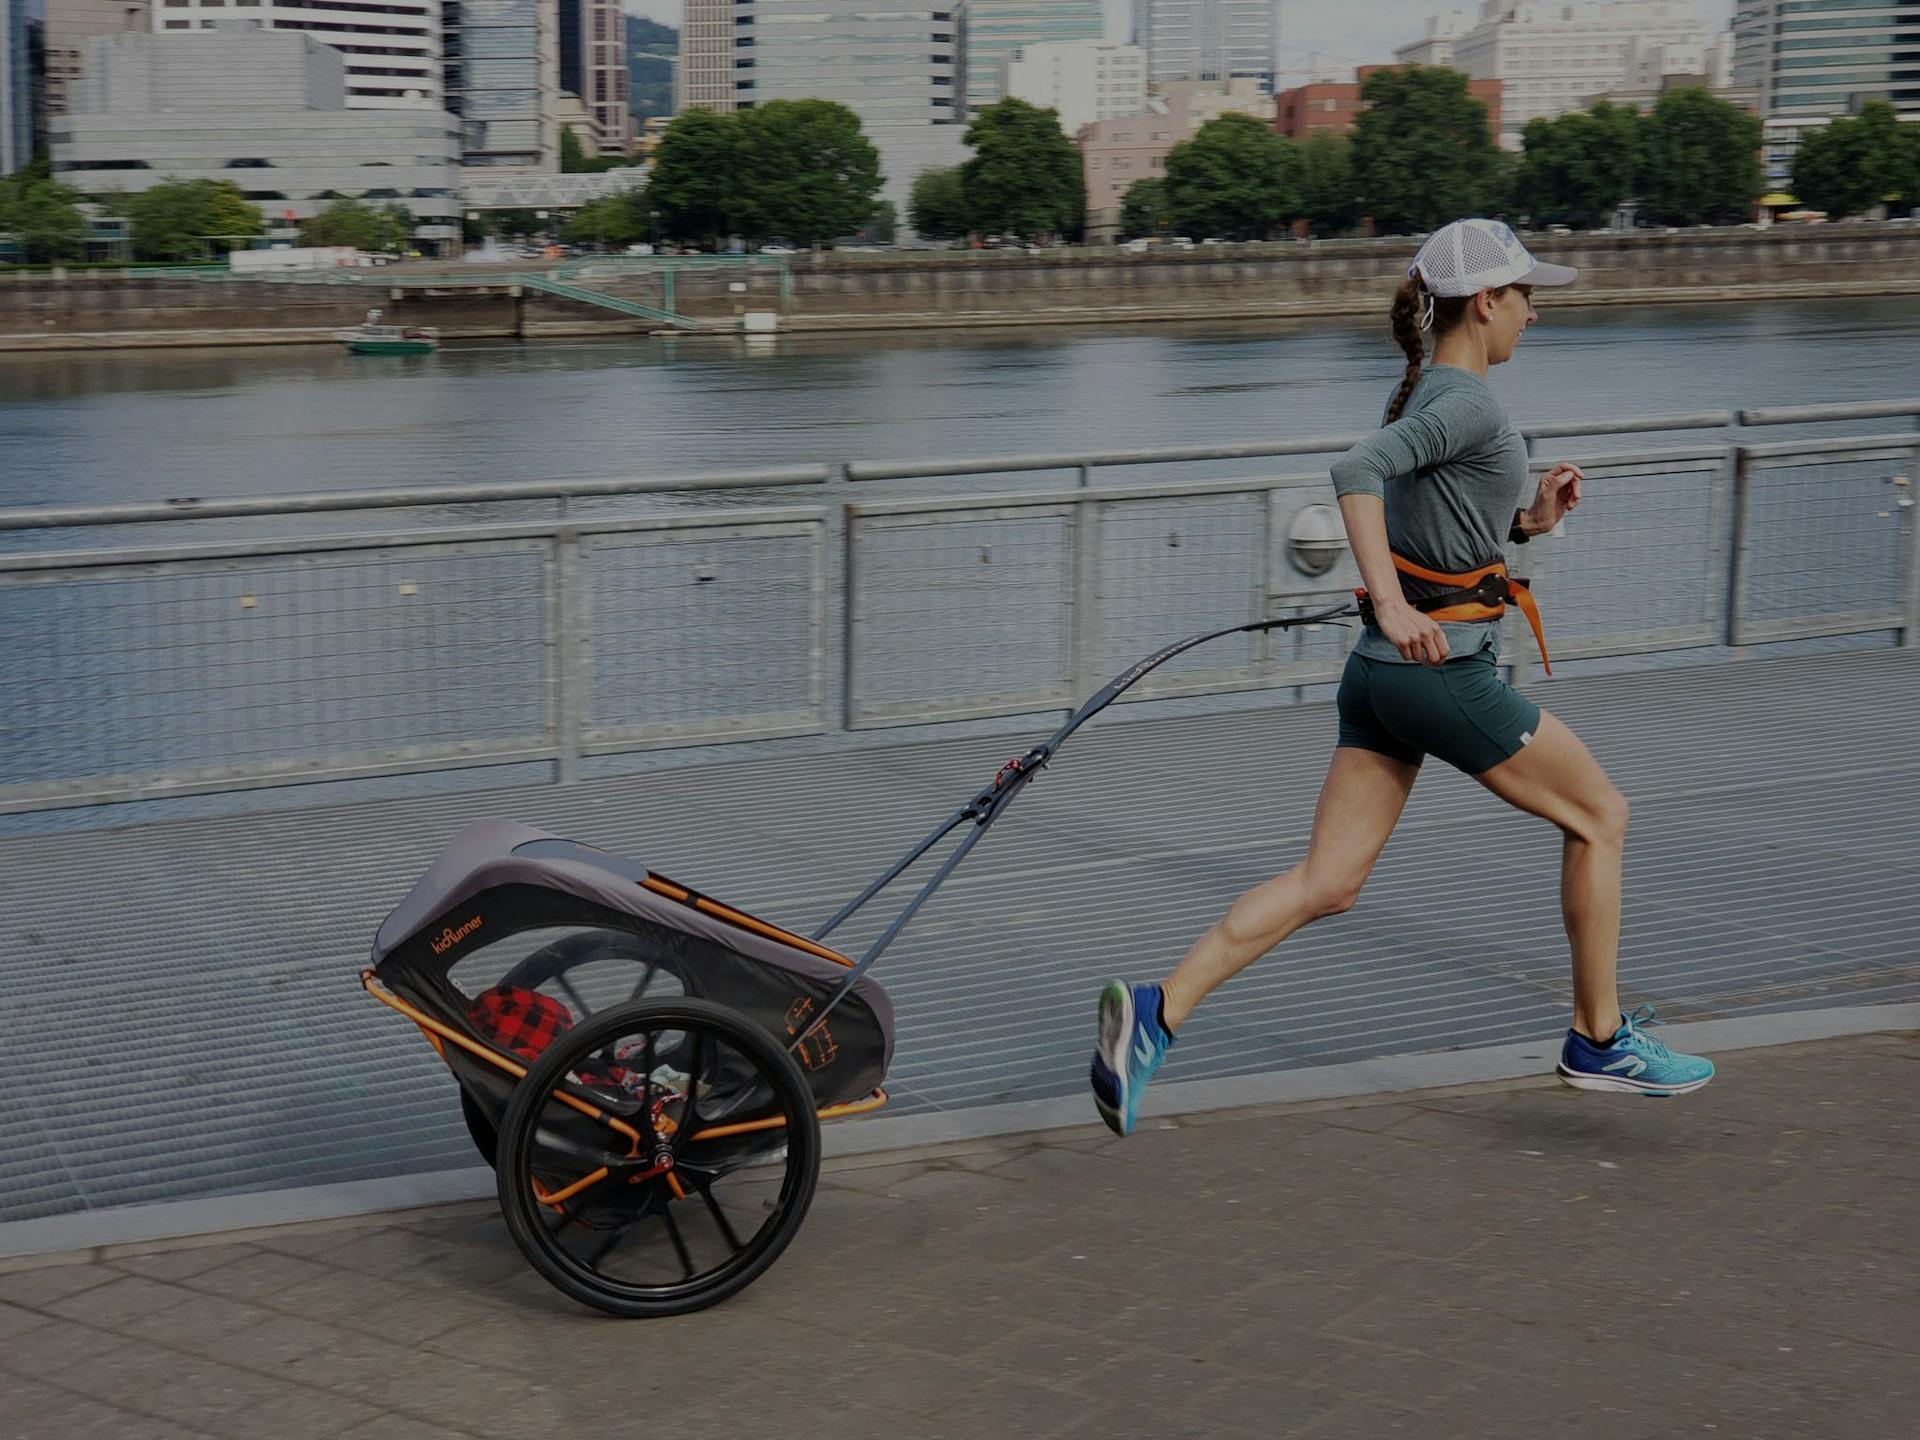 Lady running with innovative child carrier